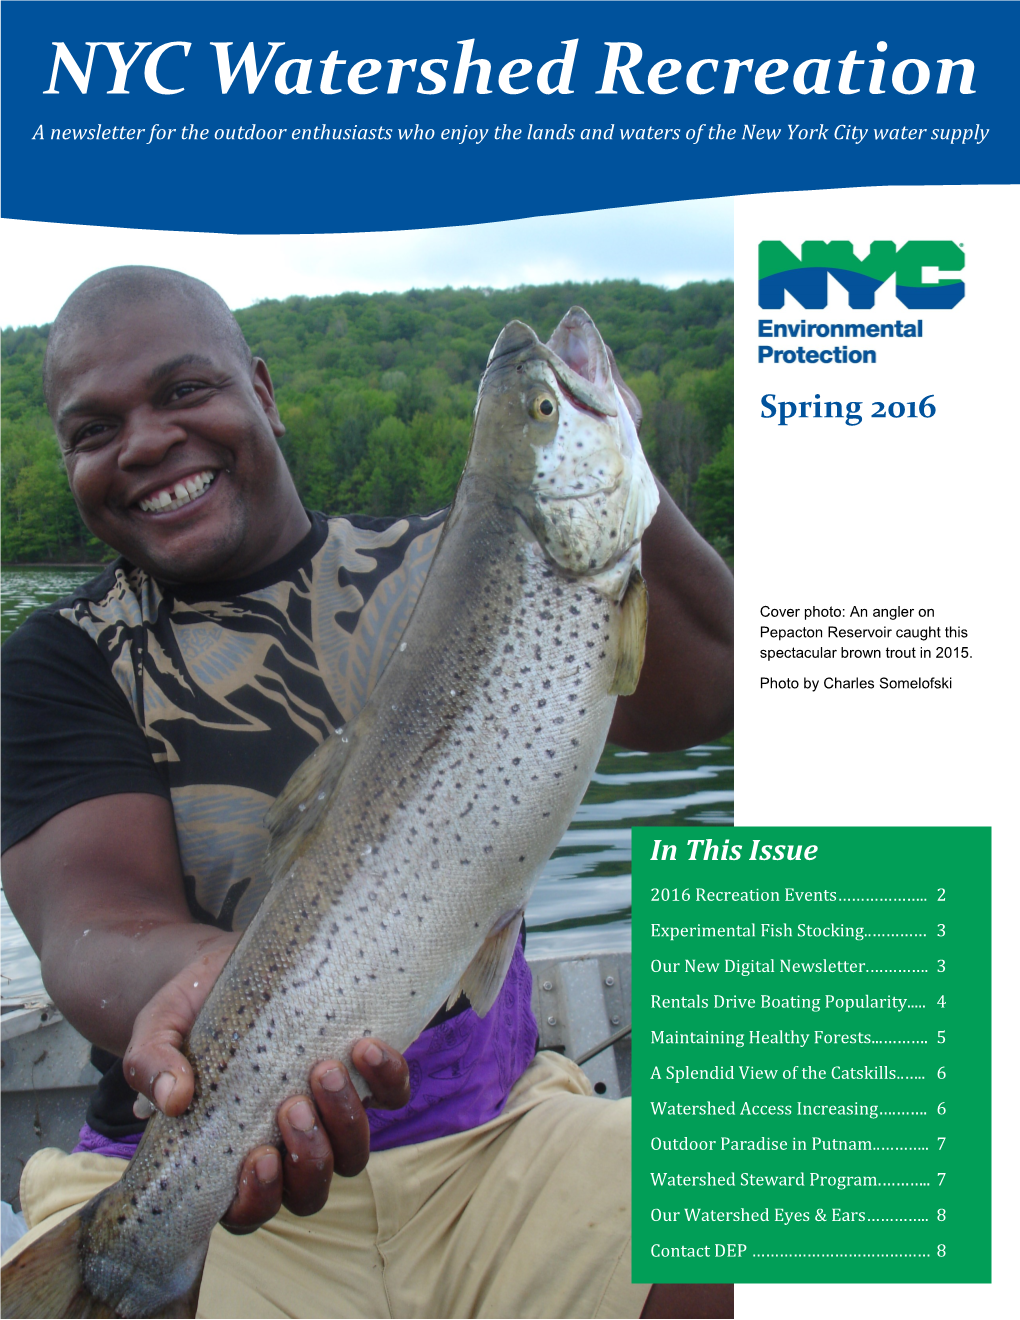 NYC Watershed Recreation a Newsletter for the Outdoor Enthusiasts Who Enjoy the Lands and Waters of the New York City Water Supply